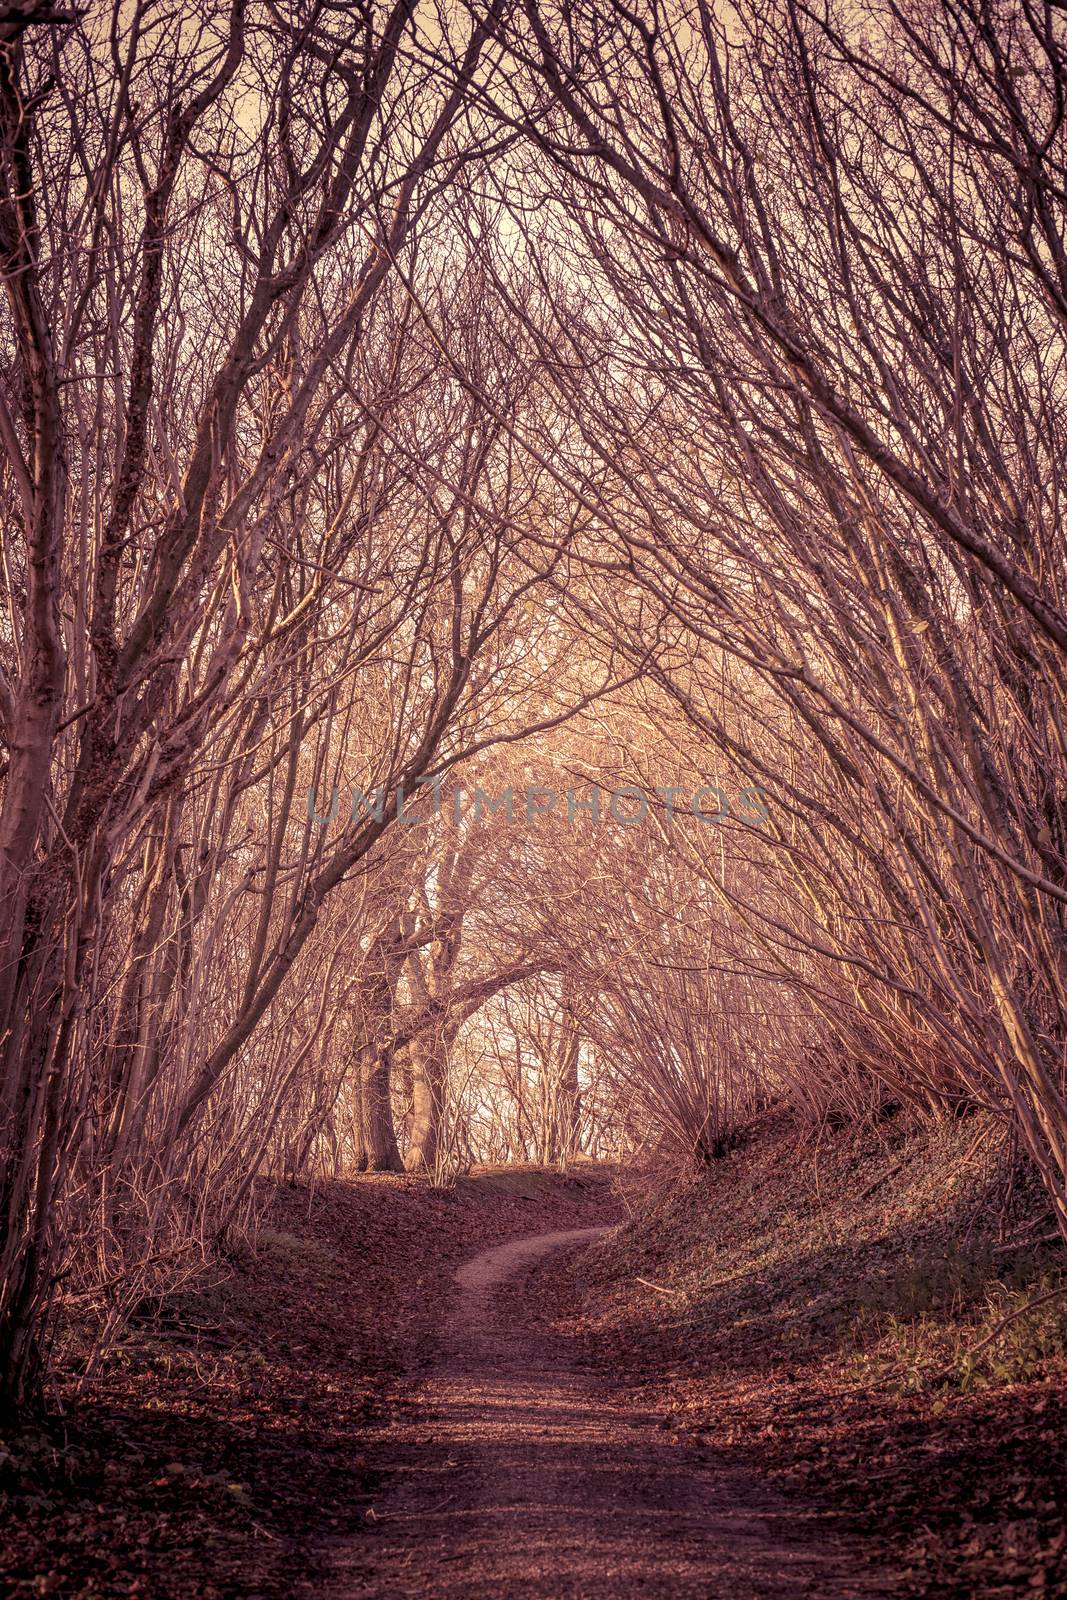 Mysterious forest with a path by Sportactive